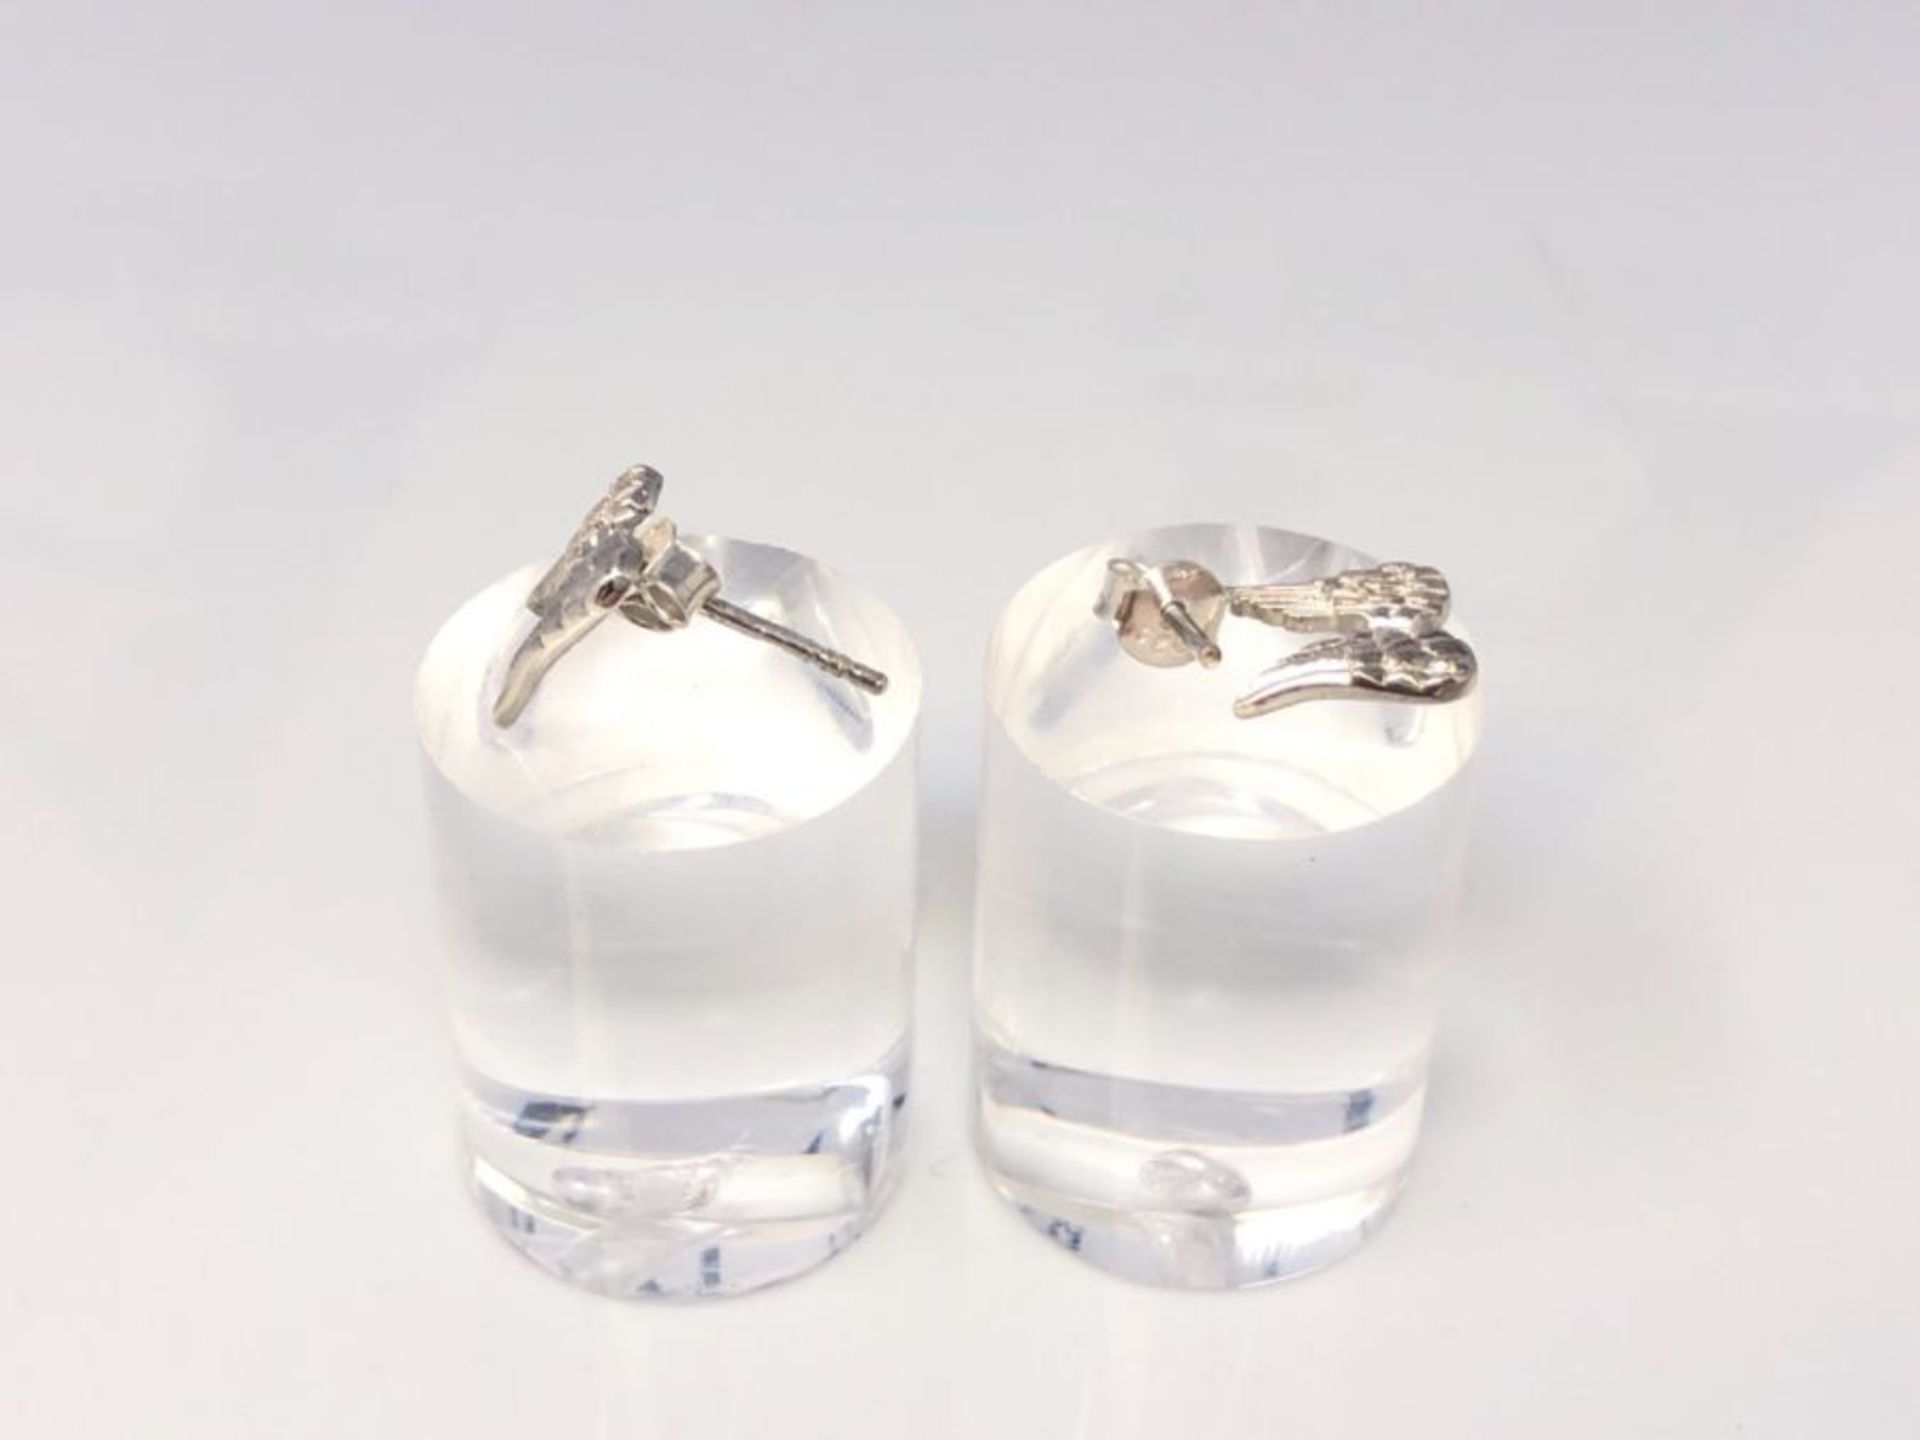 Amberta Women and Girls 925 Sterling Silver Stud Earrings Shaped Pair of Studs: Guardi - Image 3 of 3